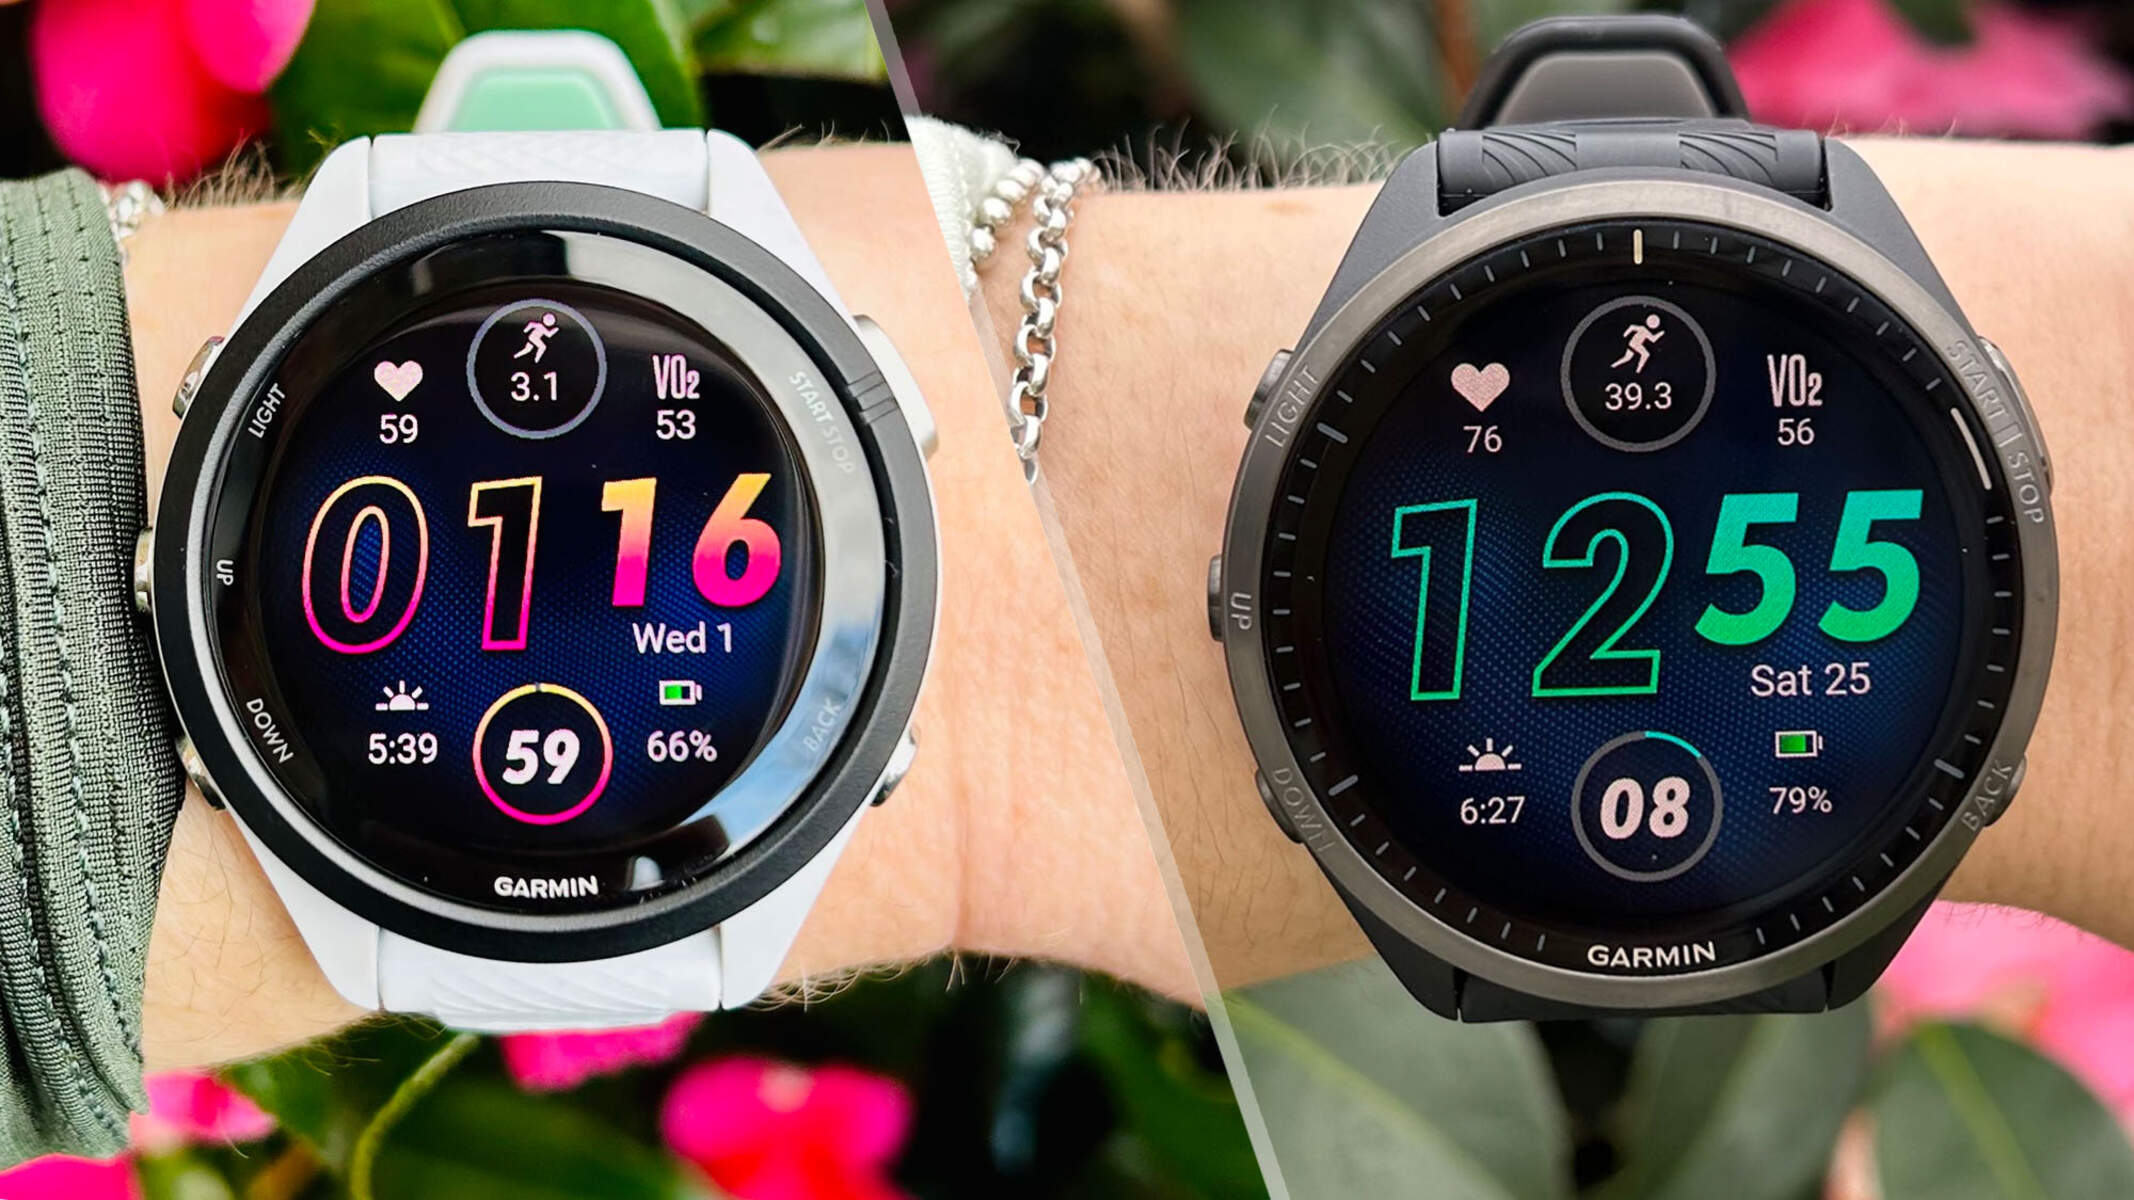 Garmin Smartwatches: A Guide To Top-Rated Models